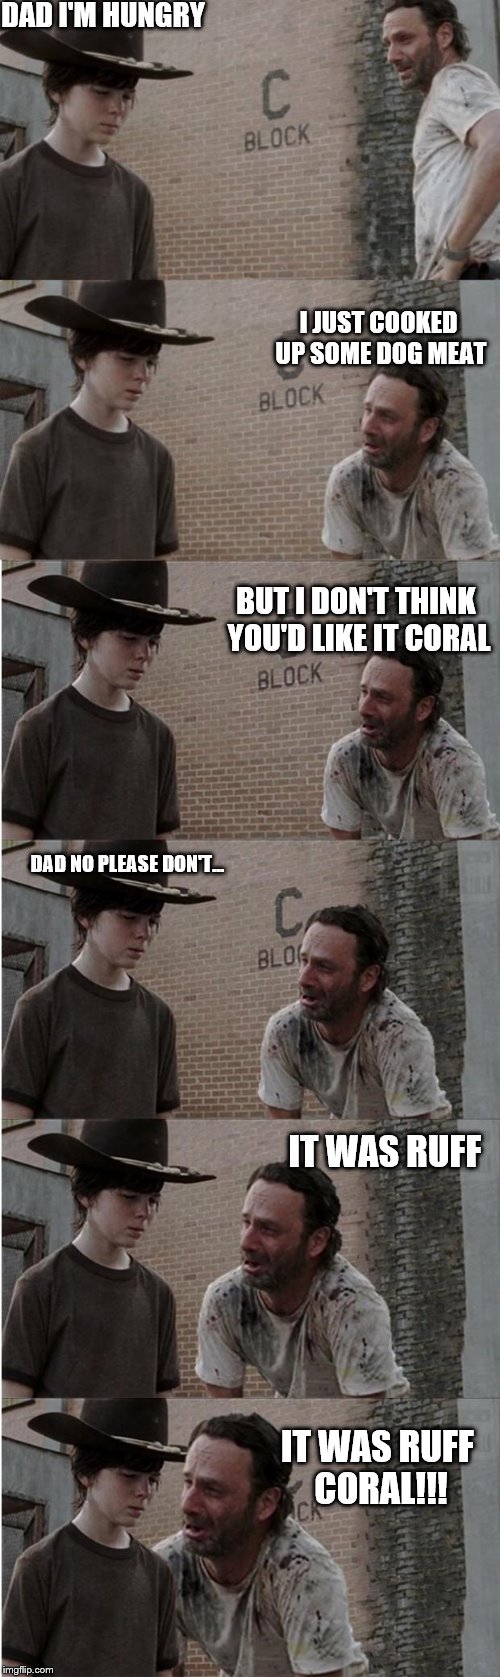 Rick and Carl Longer | DAD I'M HUNGRY; I JUST COOKED UP SOME DOG MEAT; BUT I DON'T THINK YOU'D LIKE IT CORAL; DAD NO PLEASE DON'T... IT WAS RUFF; IT WAS RUFF CORAL!!! | image tagged in memes,rick and carl longer | made w/ Imgflip meme maker